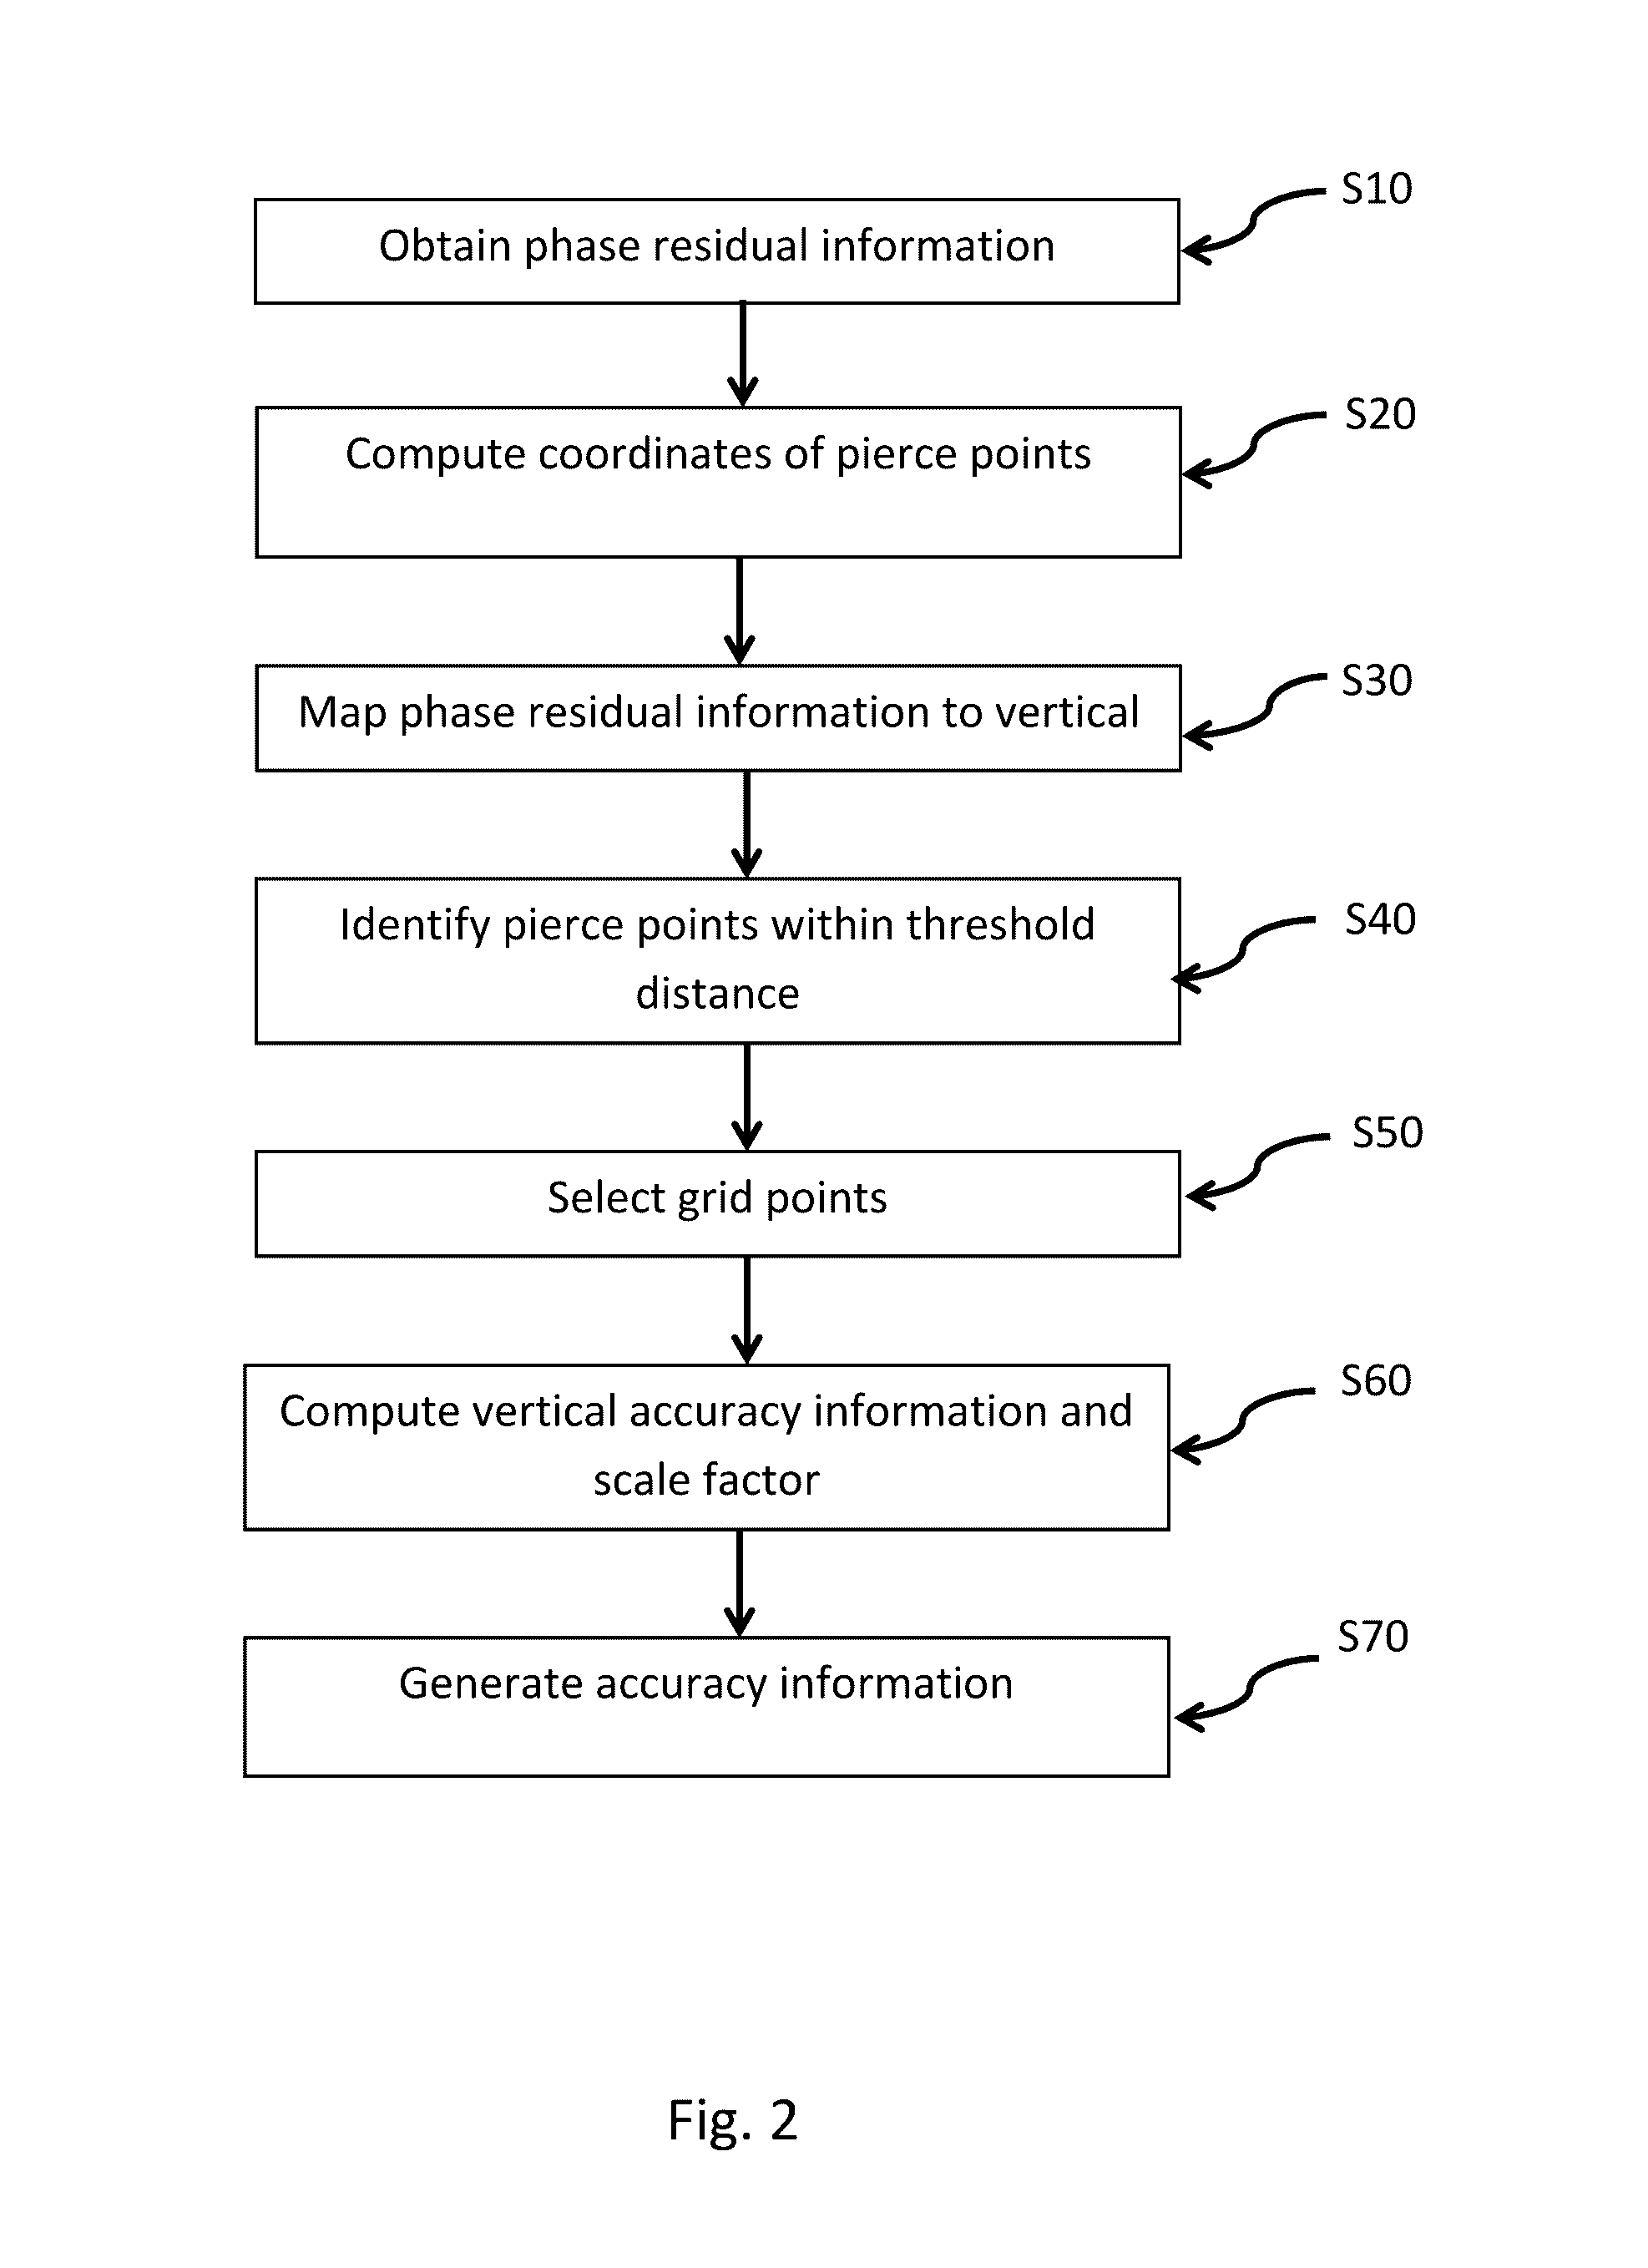 Methods for generating accuracy information on an ionosphere model for satellite navigation applications